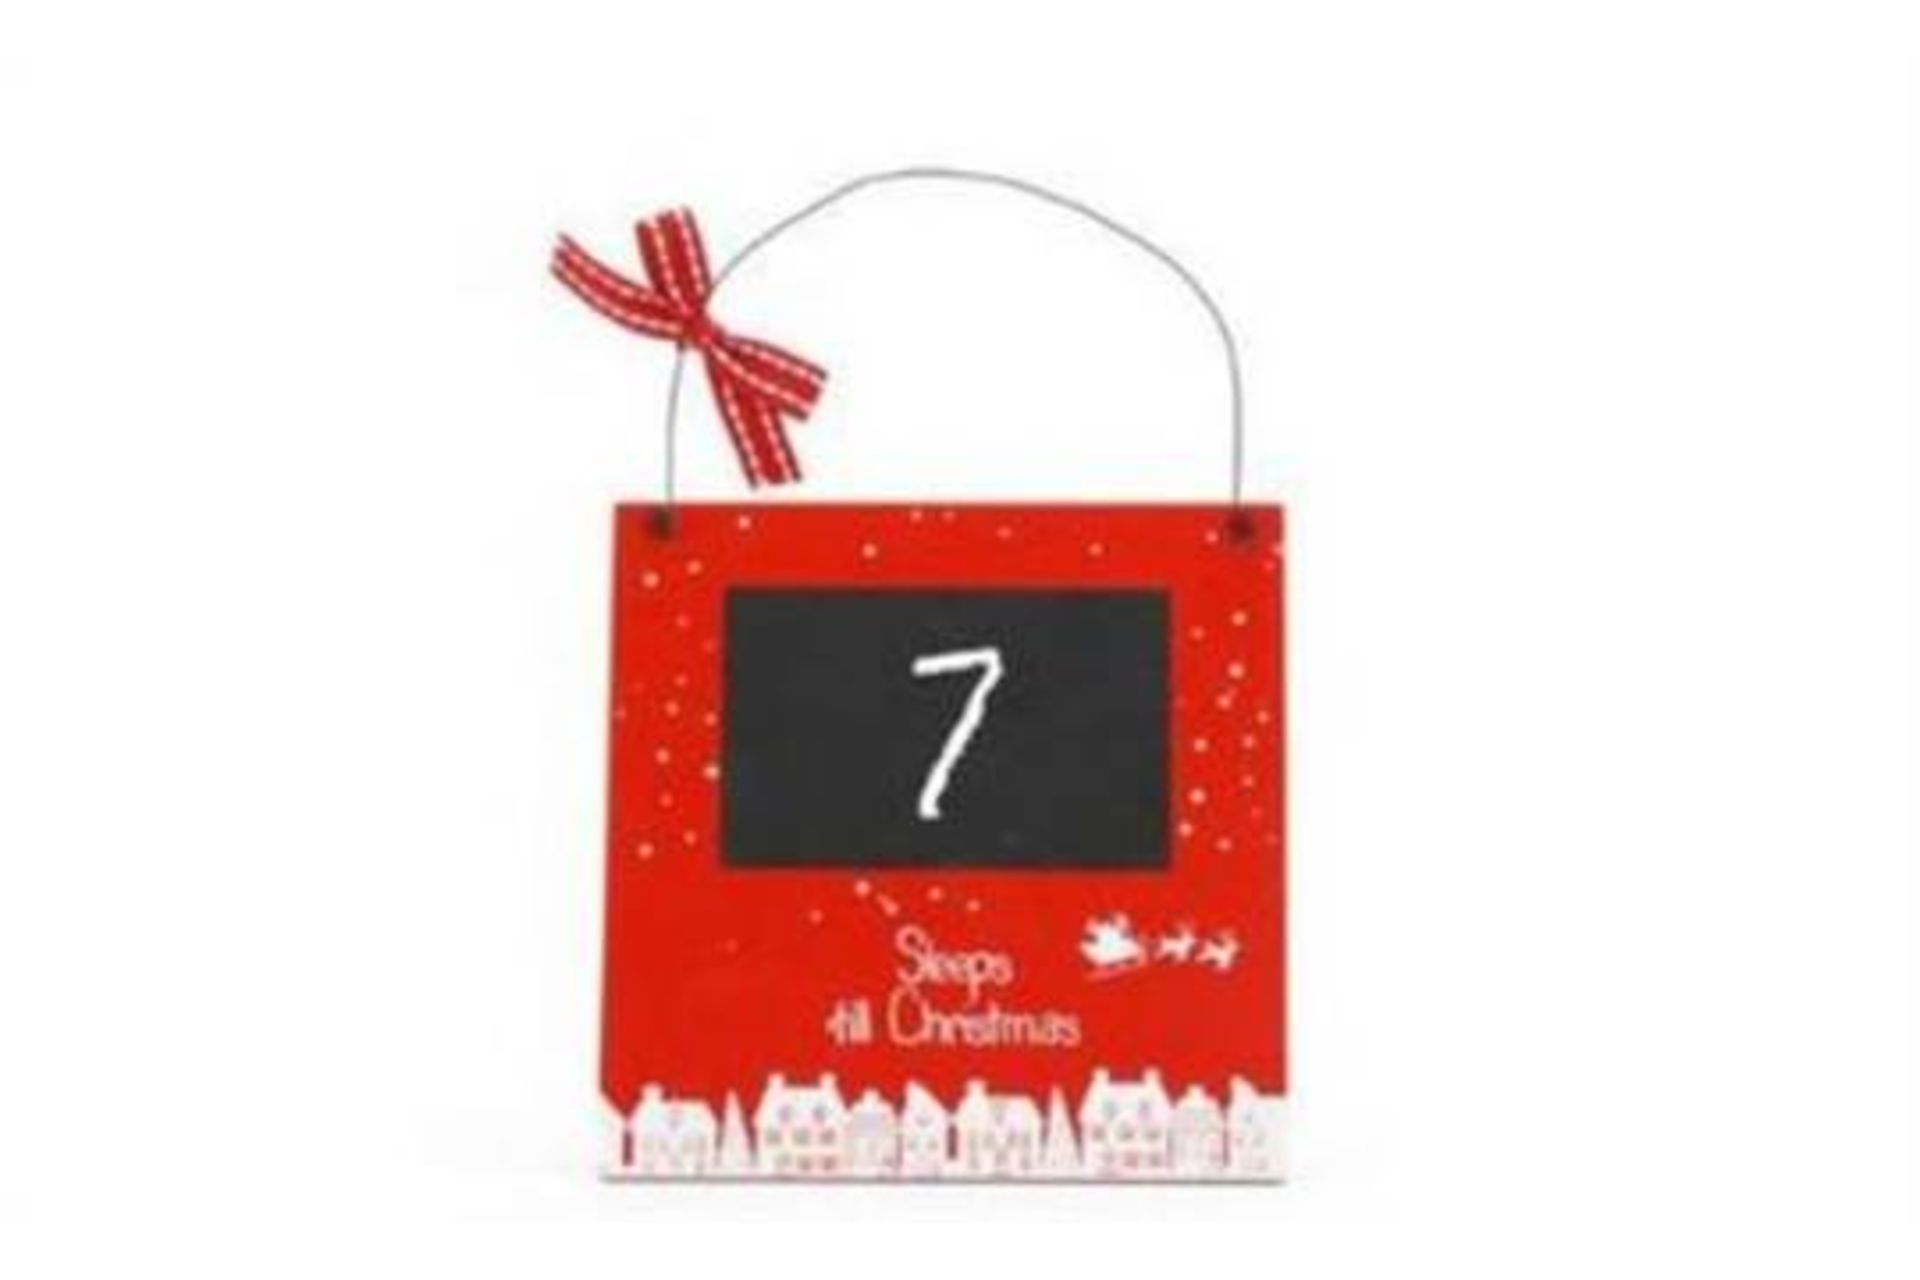 134 X CHRISTMAS WREATHS, NORTH POLE SIGNS, CHRISTMAS COUNTDOWN BOARD, ETC. RRP £ 843.30 - Image 2 of 6